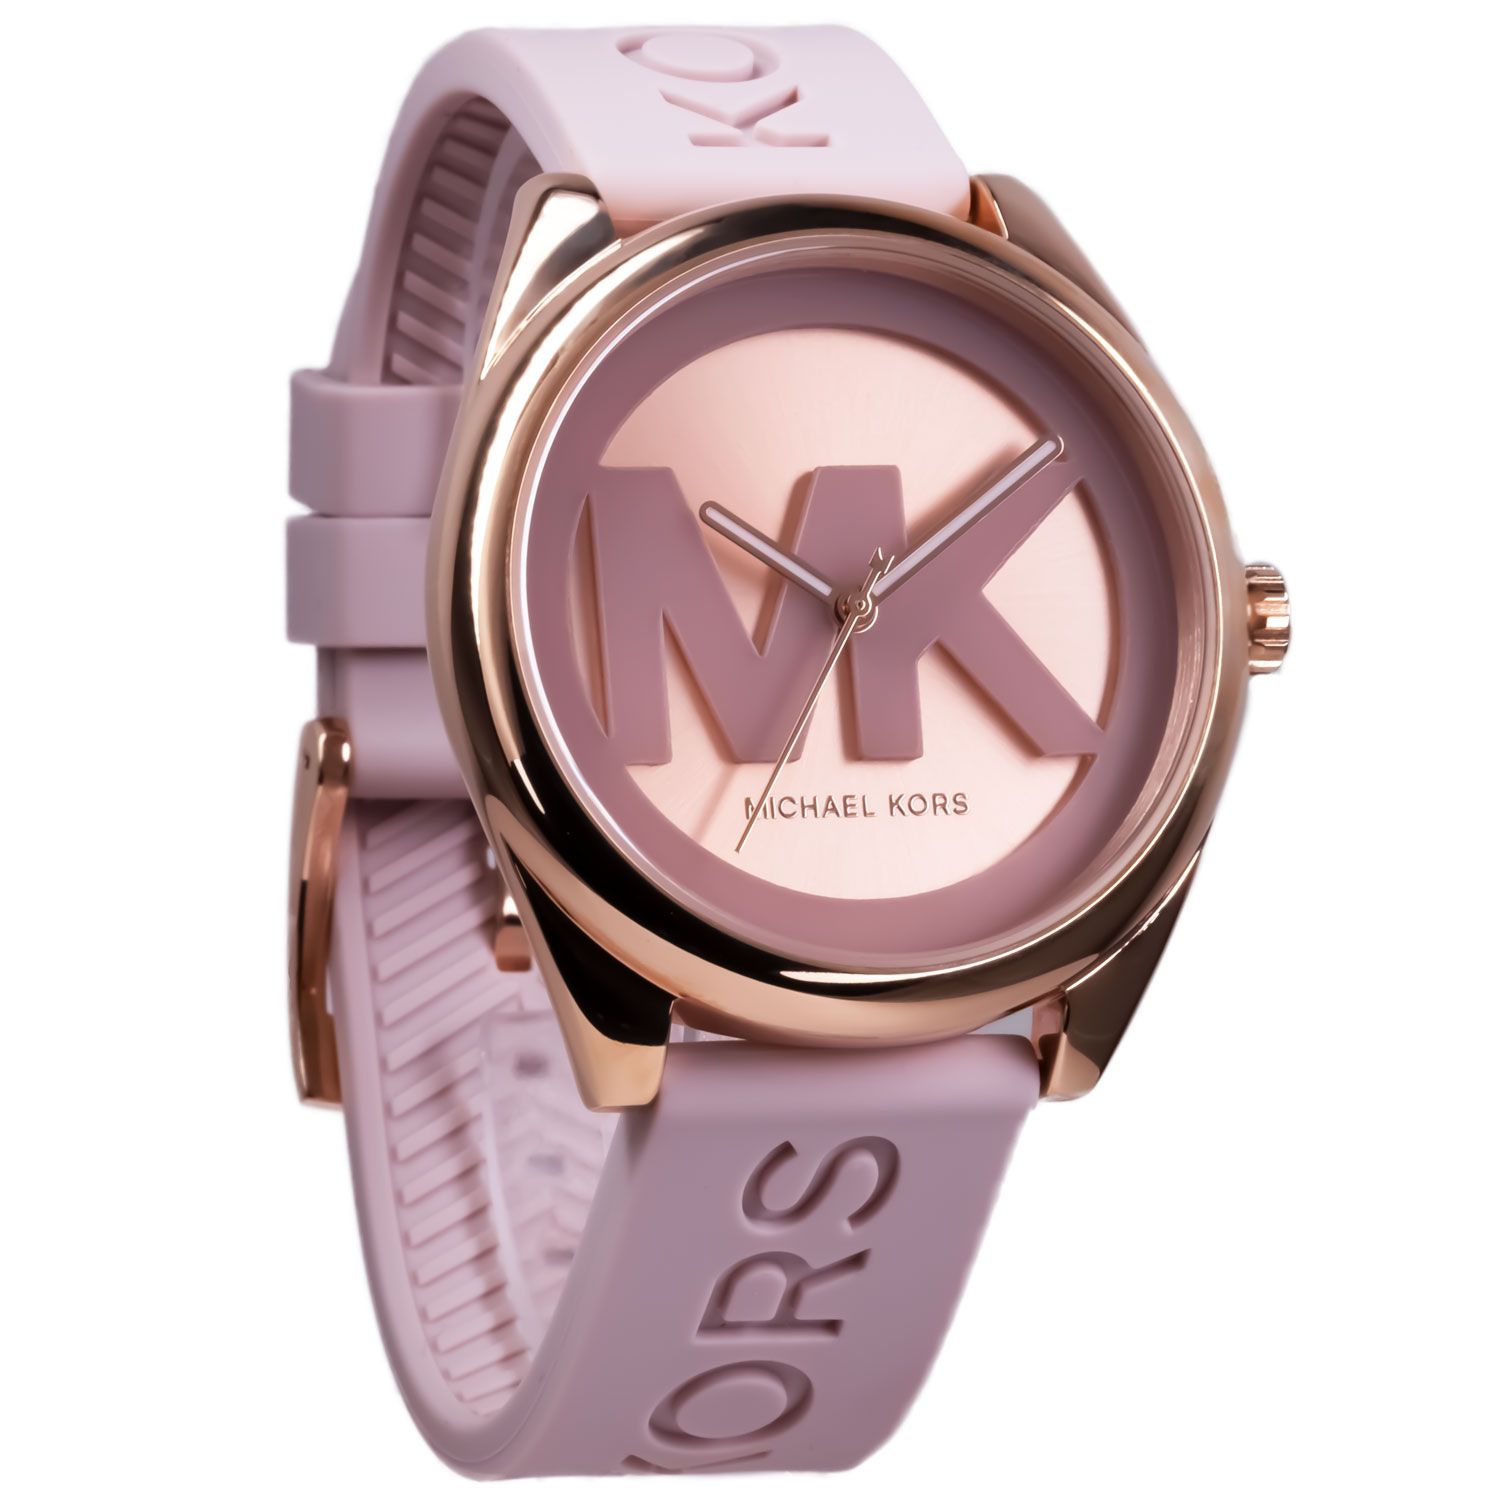 ĐỒNG HỒ NỮ MICHAEL KORS RUNWAY JANELLE ROSE GOLD PINK SILICONE WATCH MK7139 5